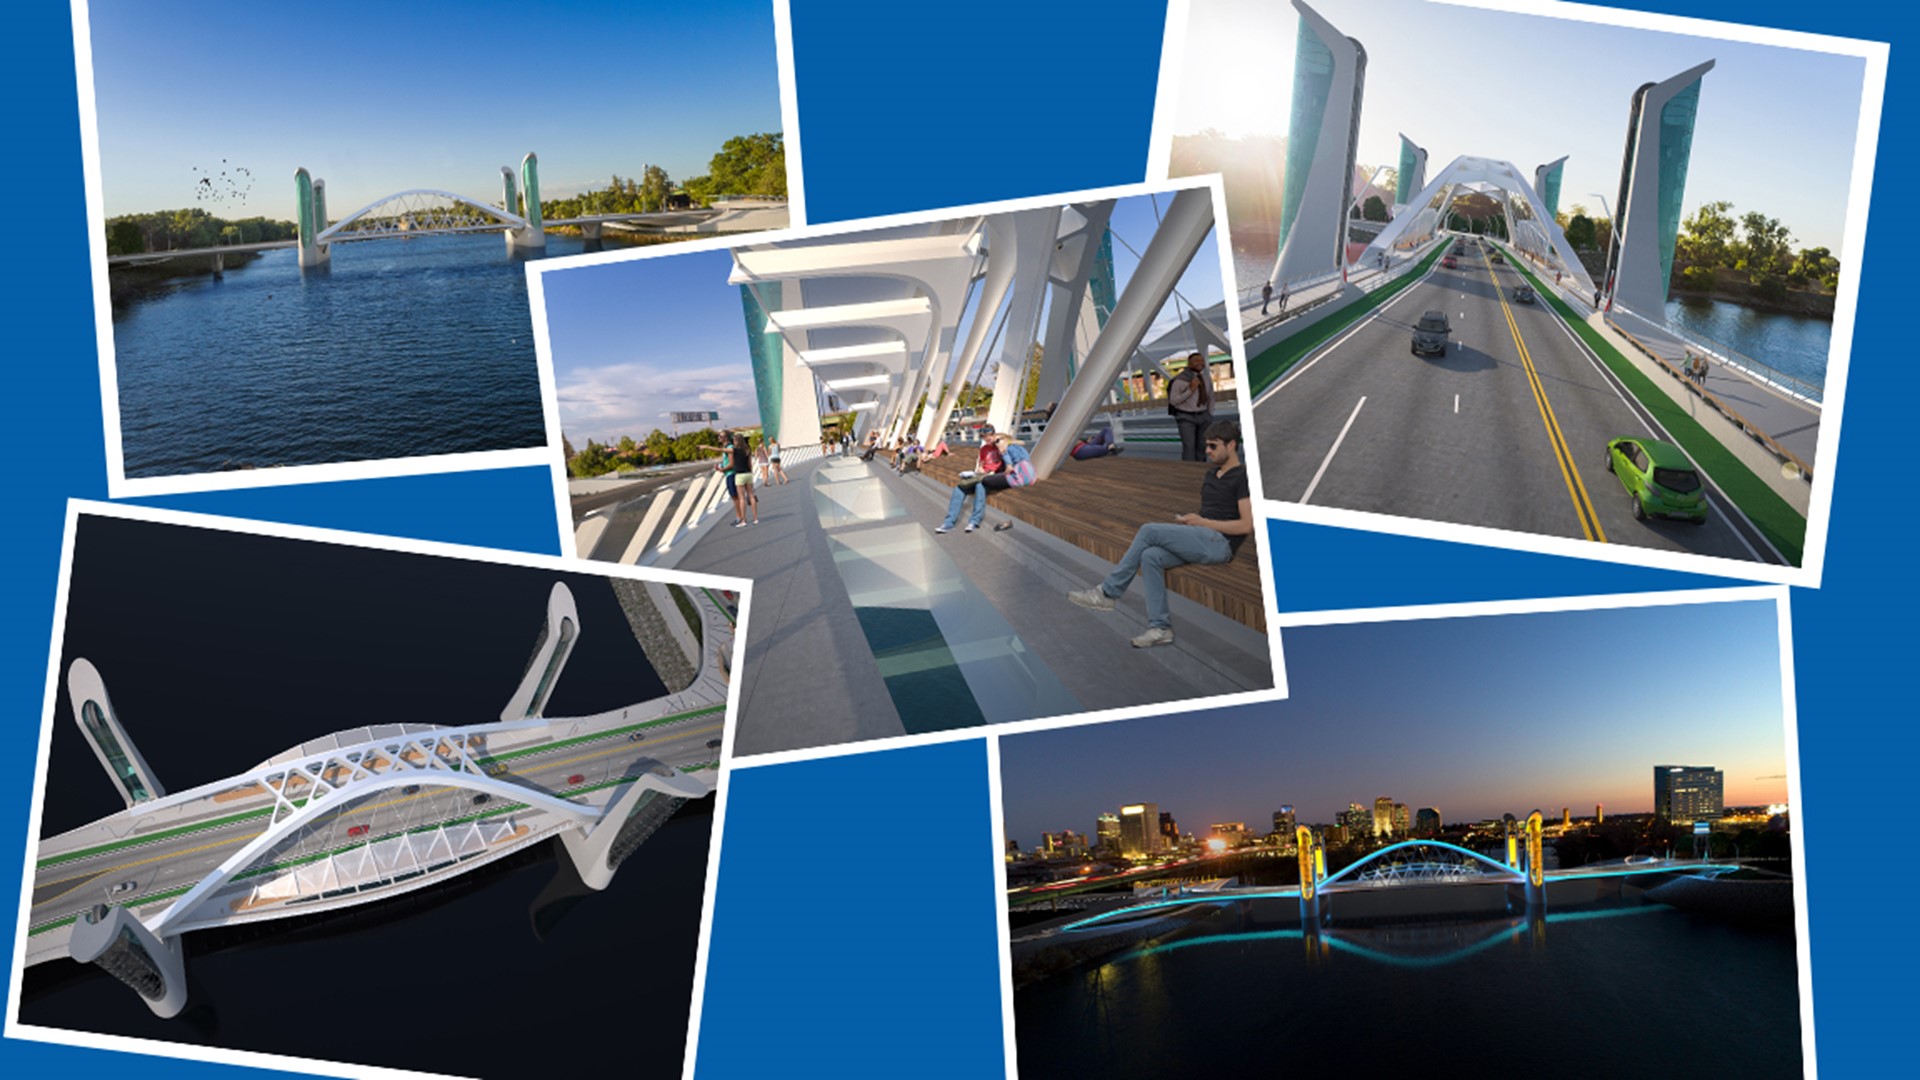 The cities of Sacramento and West Sacramento announced the design for the new bridge to be built by 2023.